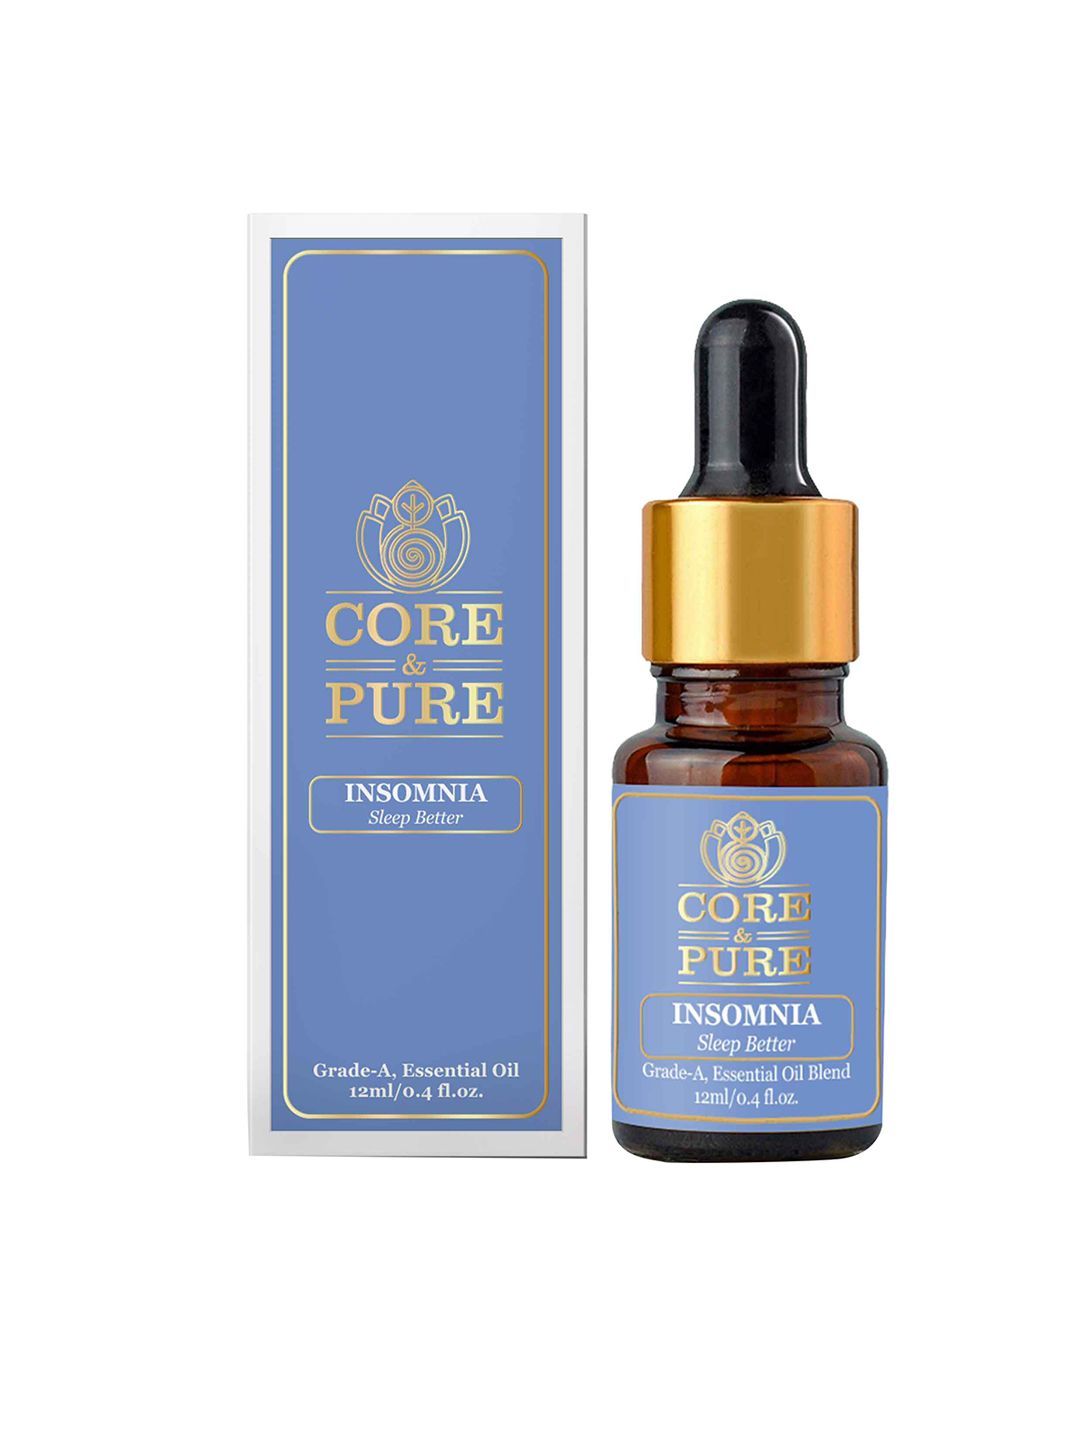 CORE & PURE Insomnia for Better Sleep Grade-A Essential Oil 12ml Price in India